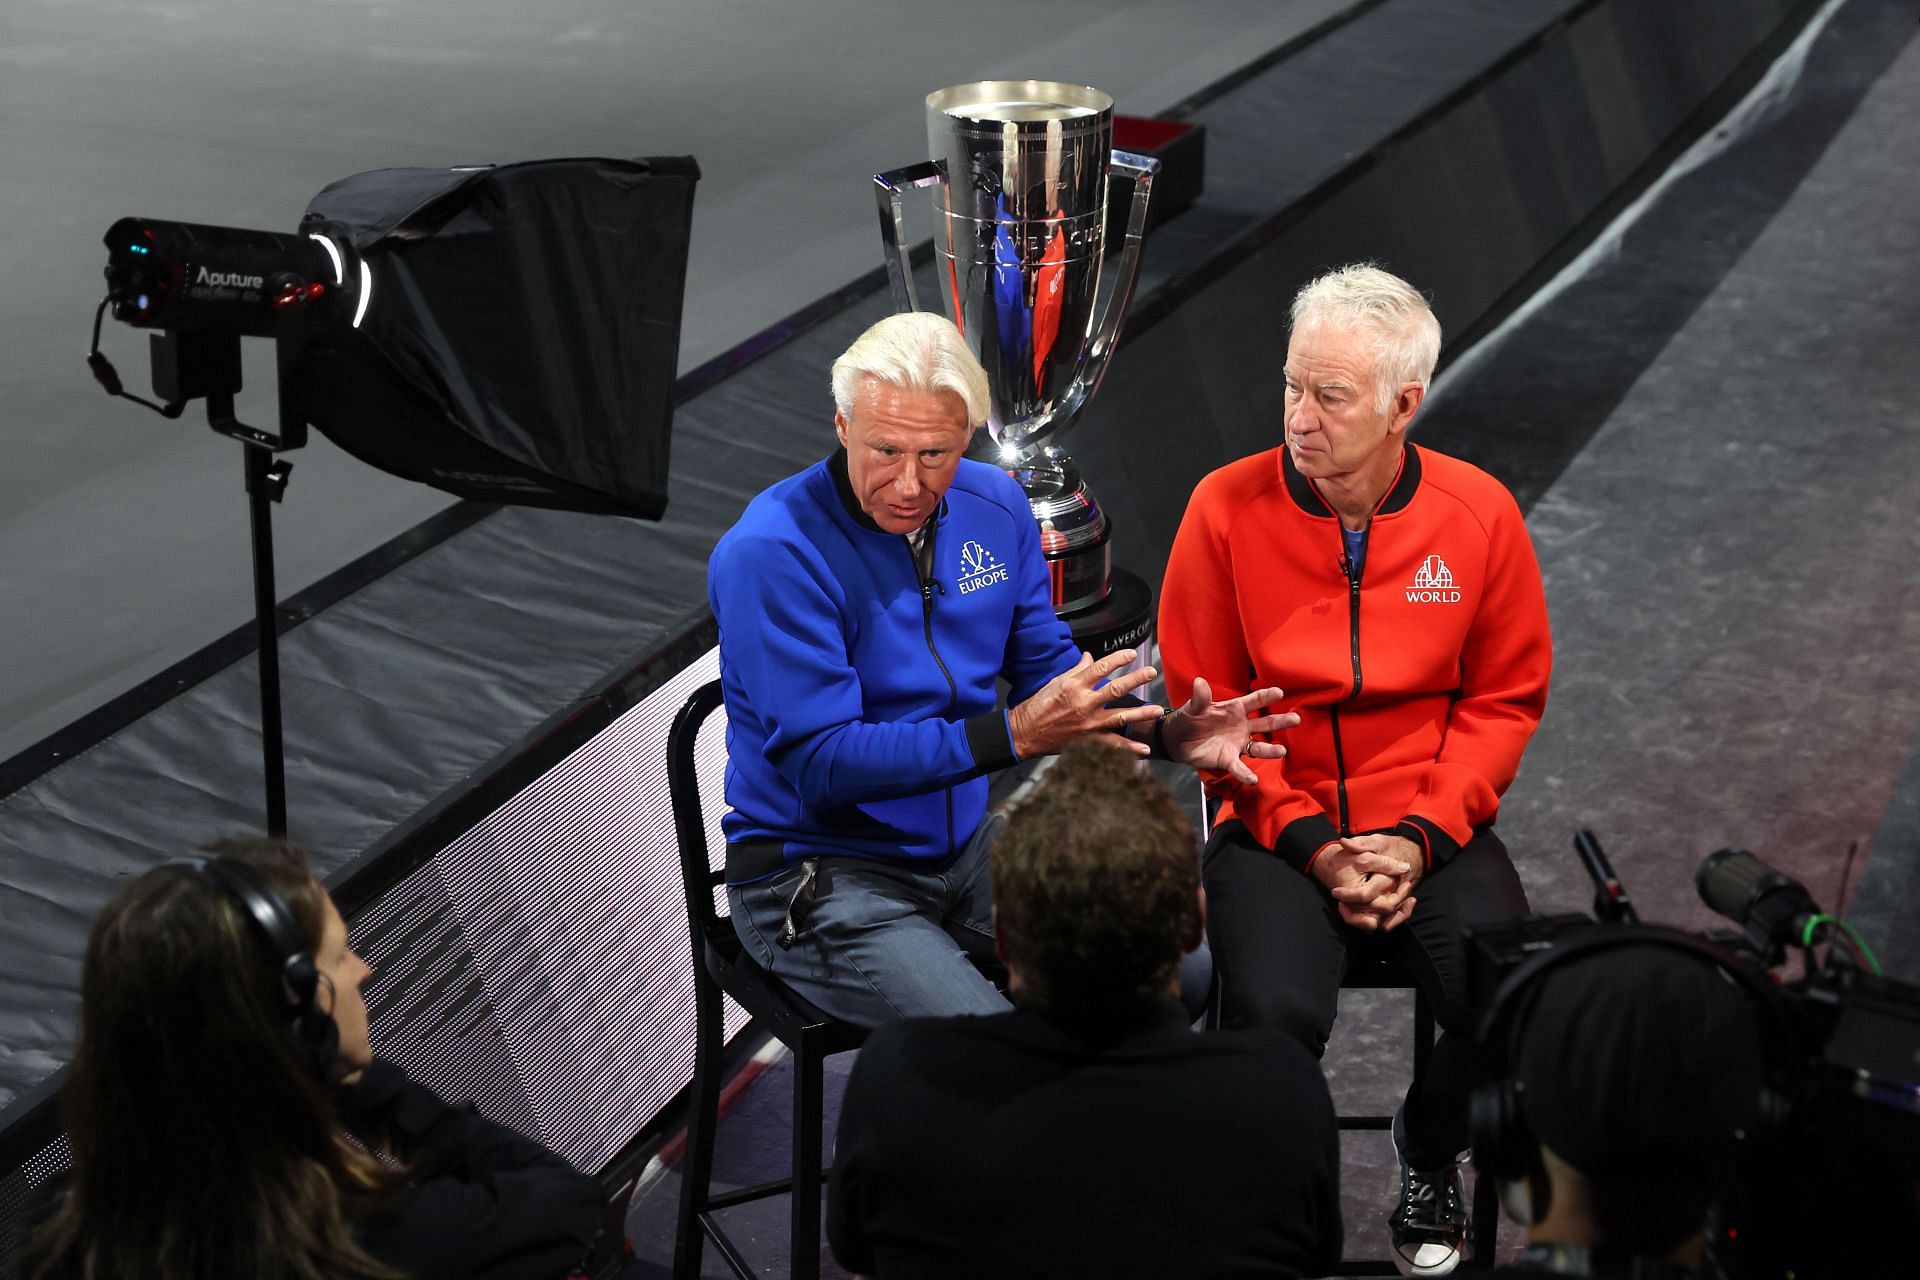 Bjorn Borg and John McEnroe pictured at the Laver Cup